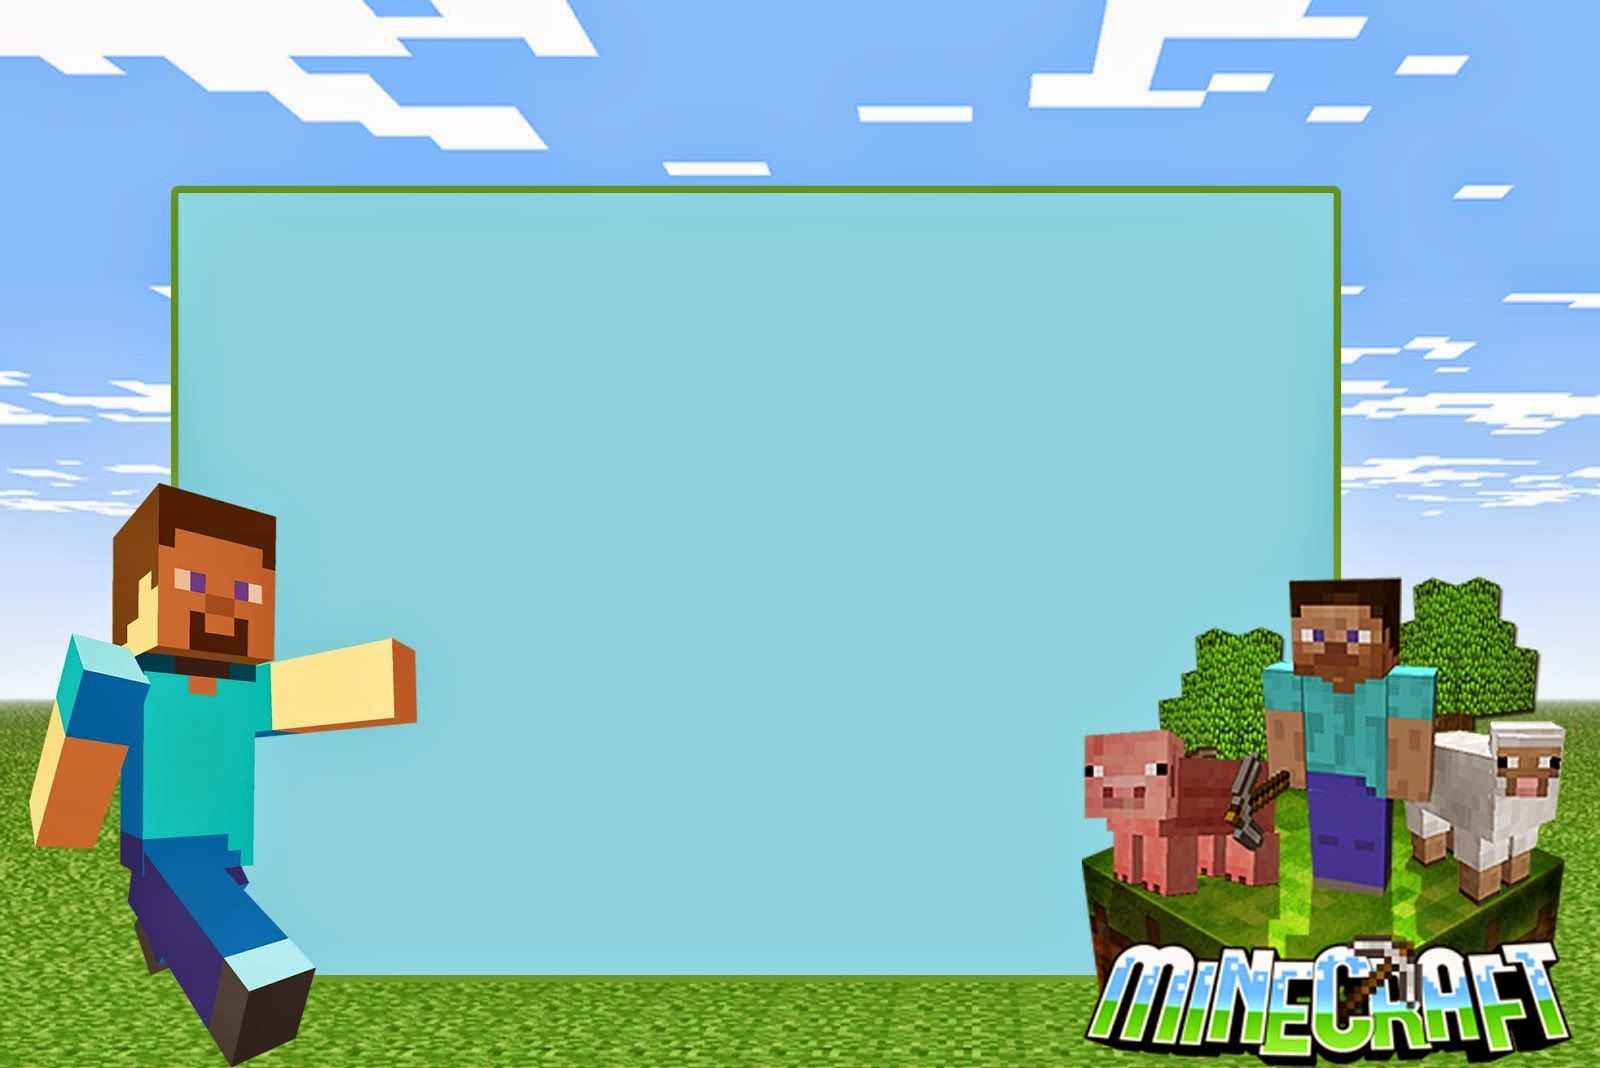 Minecraft: Free Printable Invitations. | Party Ideas In Minecraft Birthday Card Template